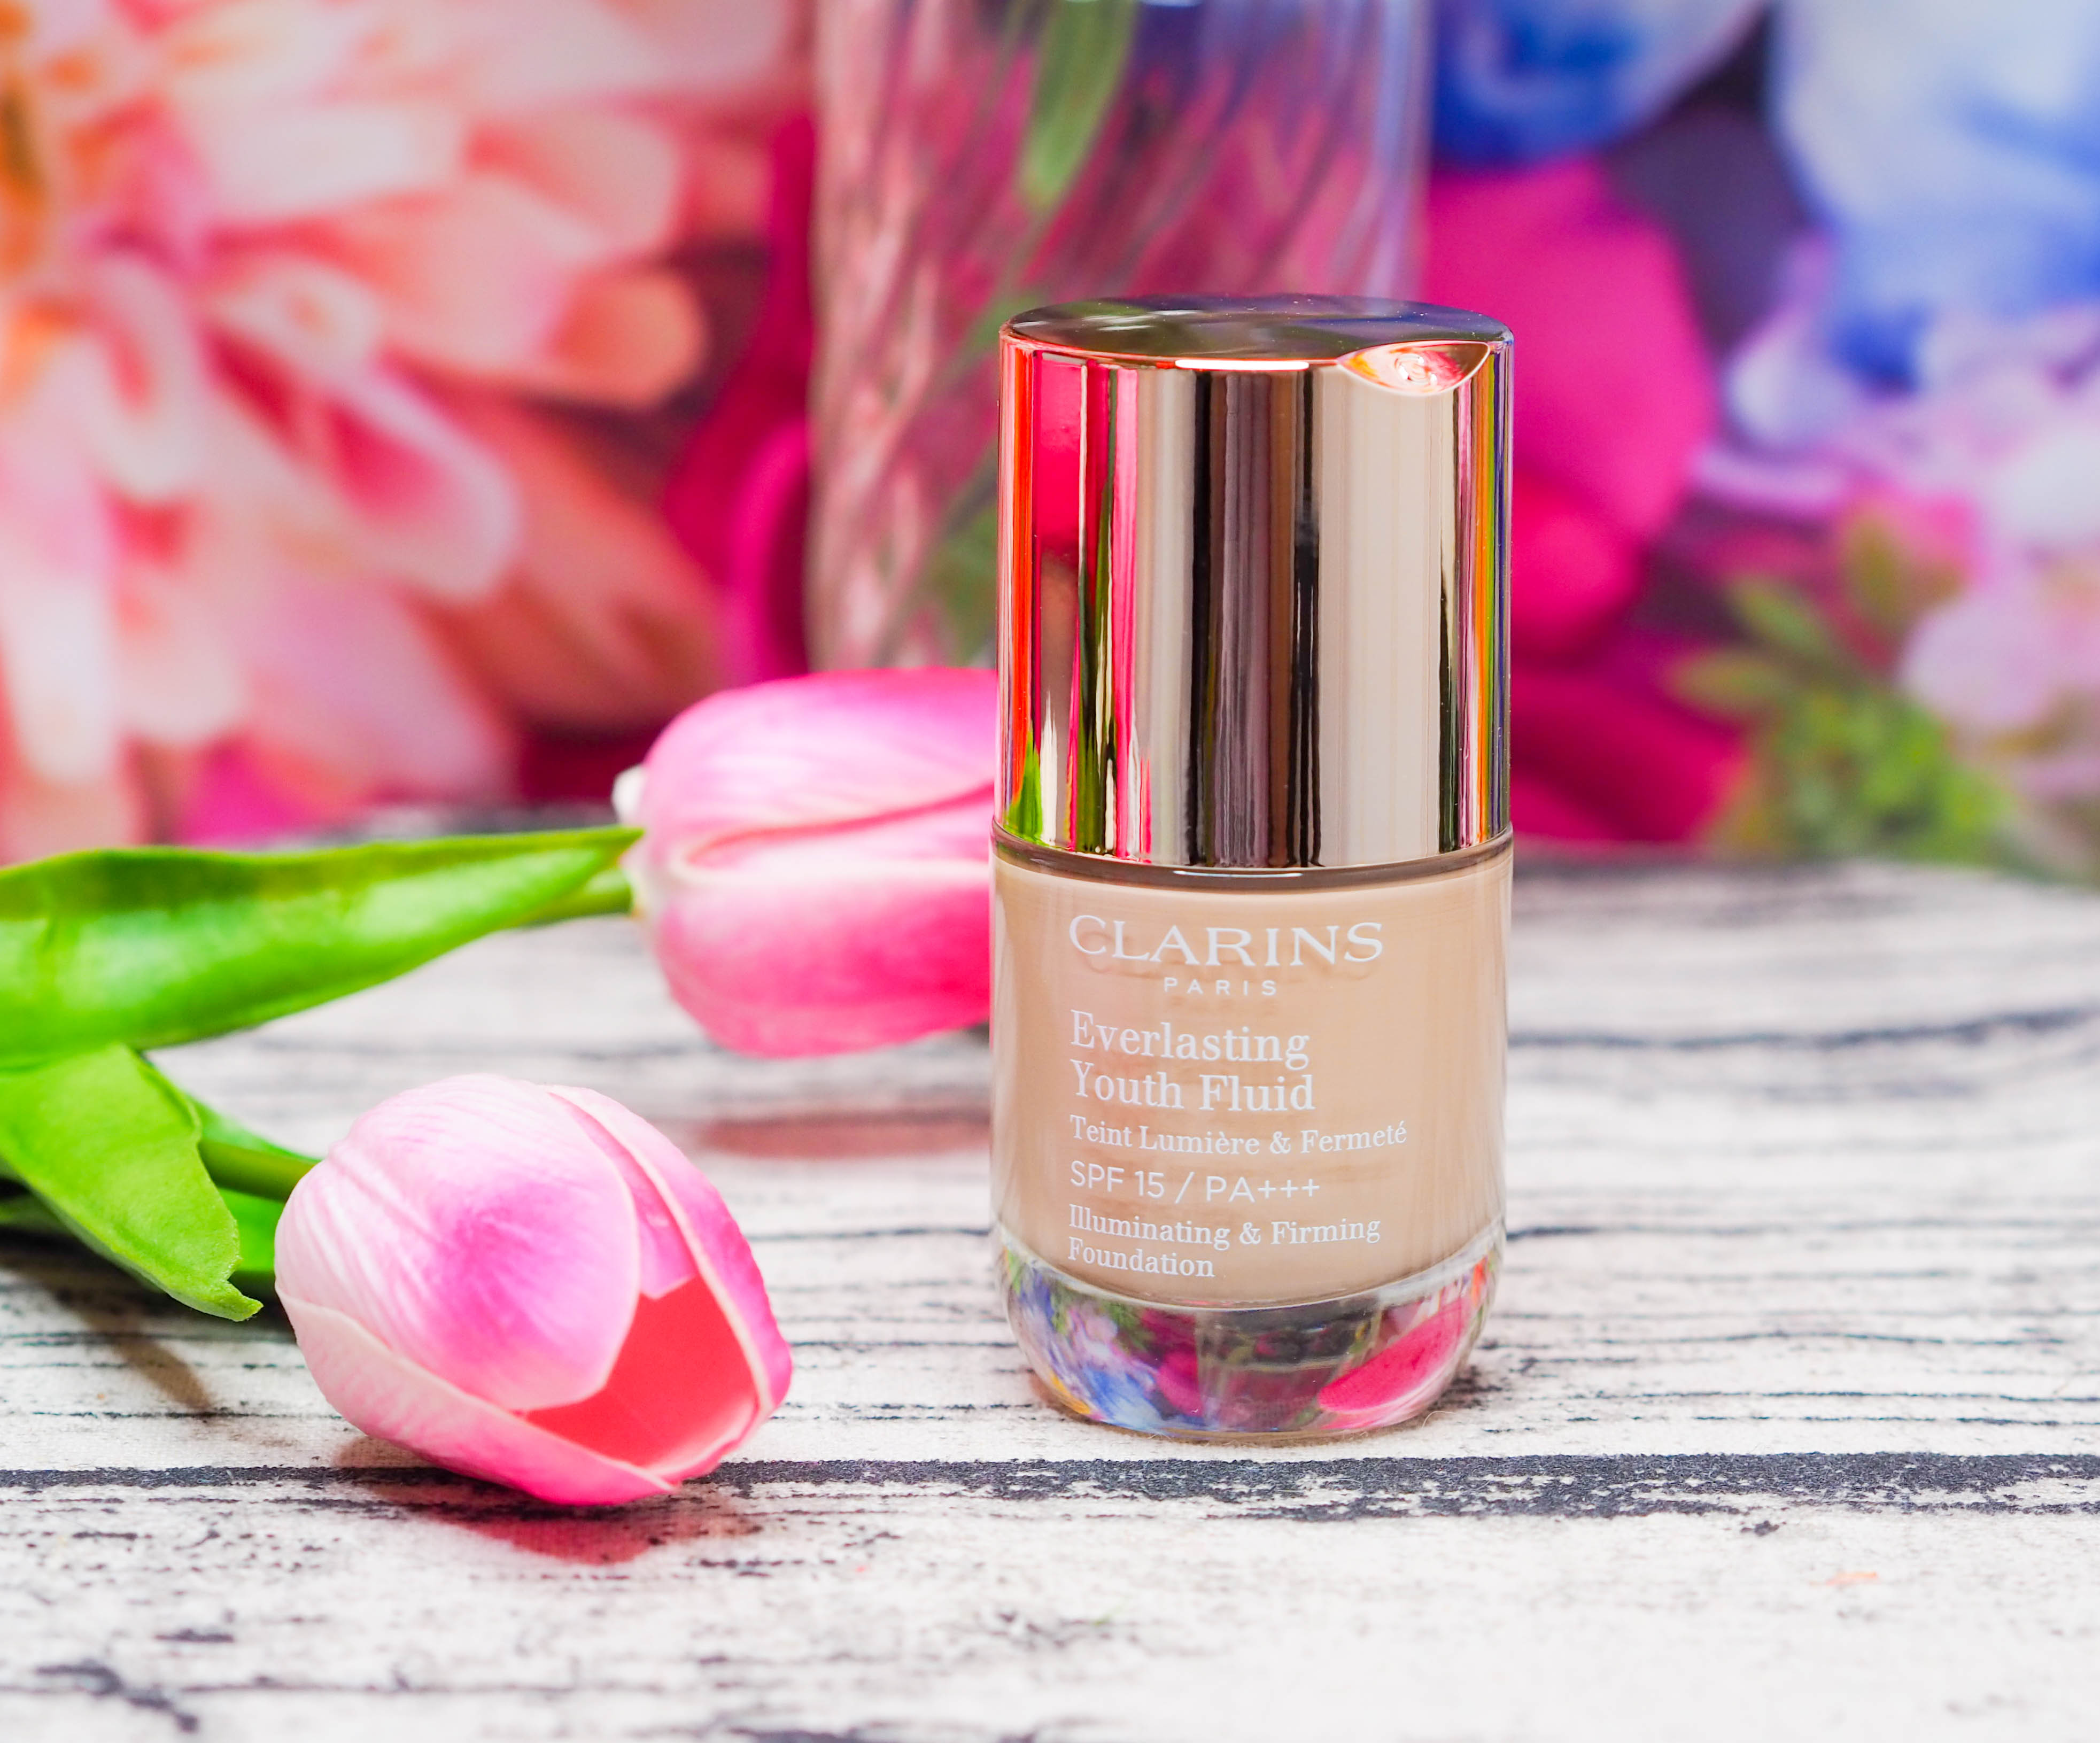 Clarins Everlasting Youth Fluid Foundation Review